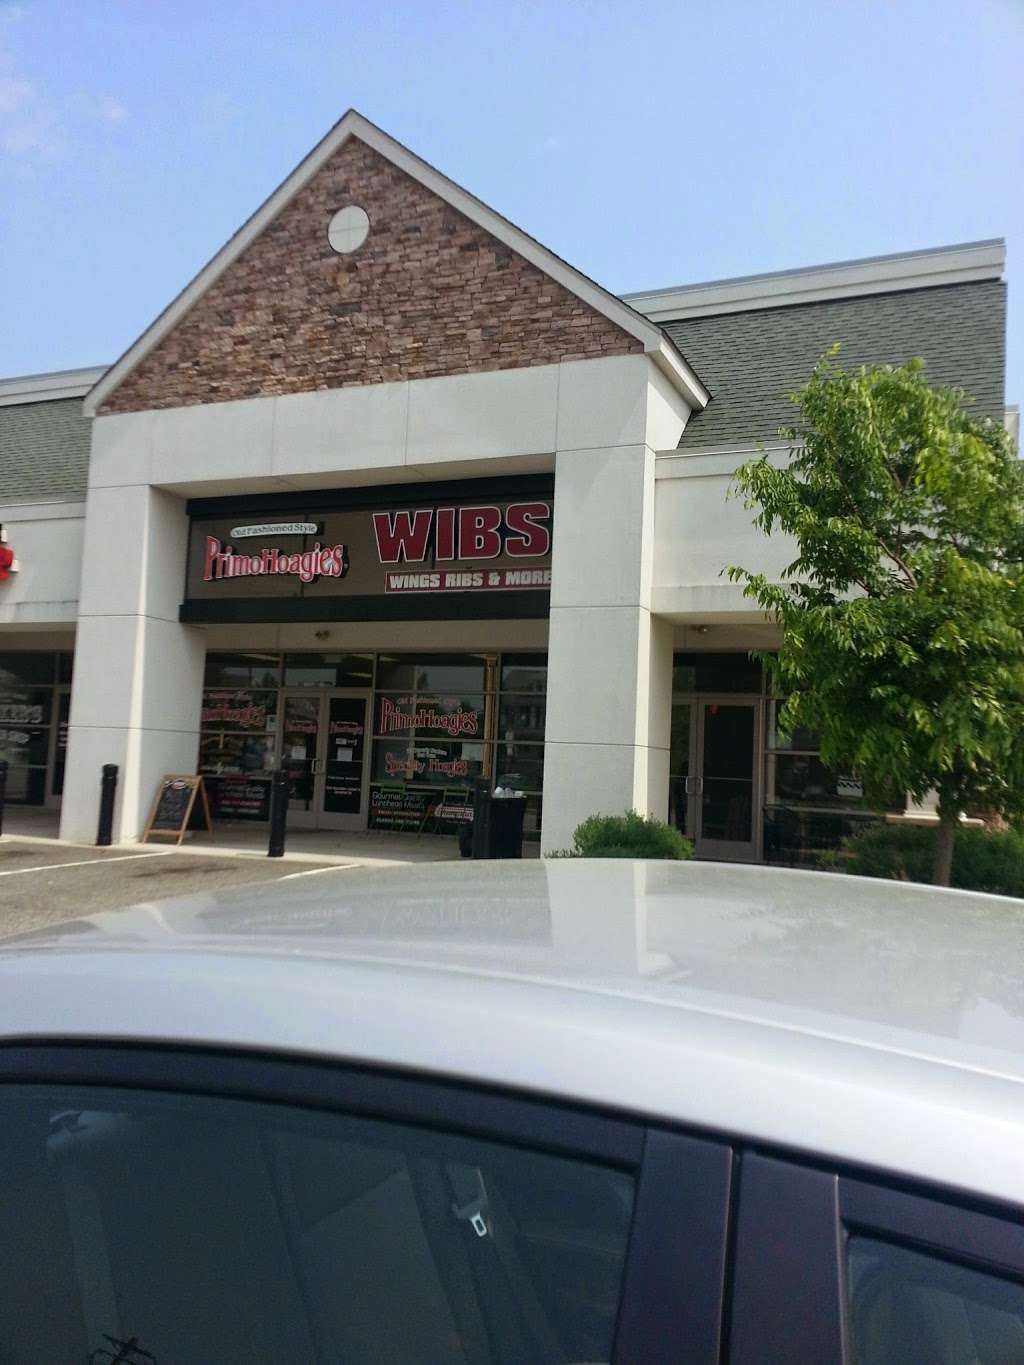 Wibs Wings Ribs & More | 1850 S Collegeville Rd, Collegeville, PA 19426 | Phone: (610) 489-1350